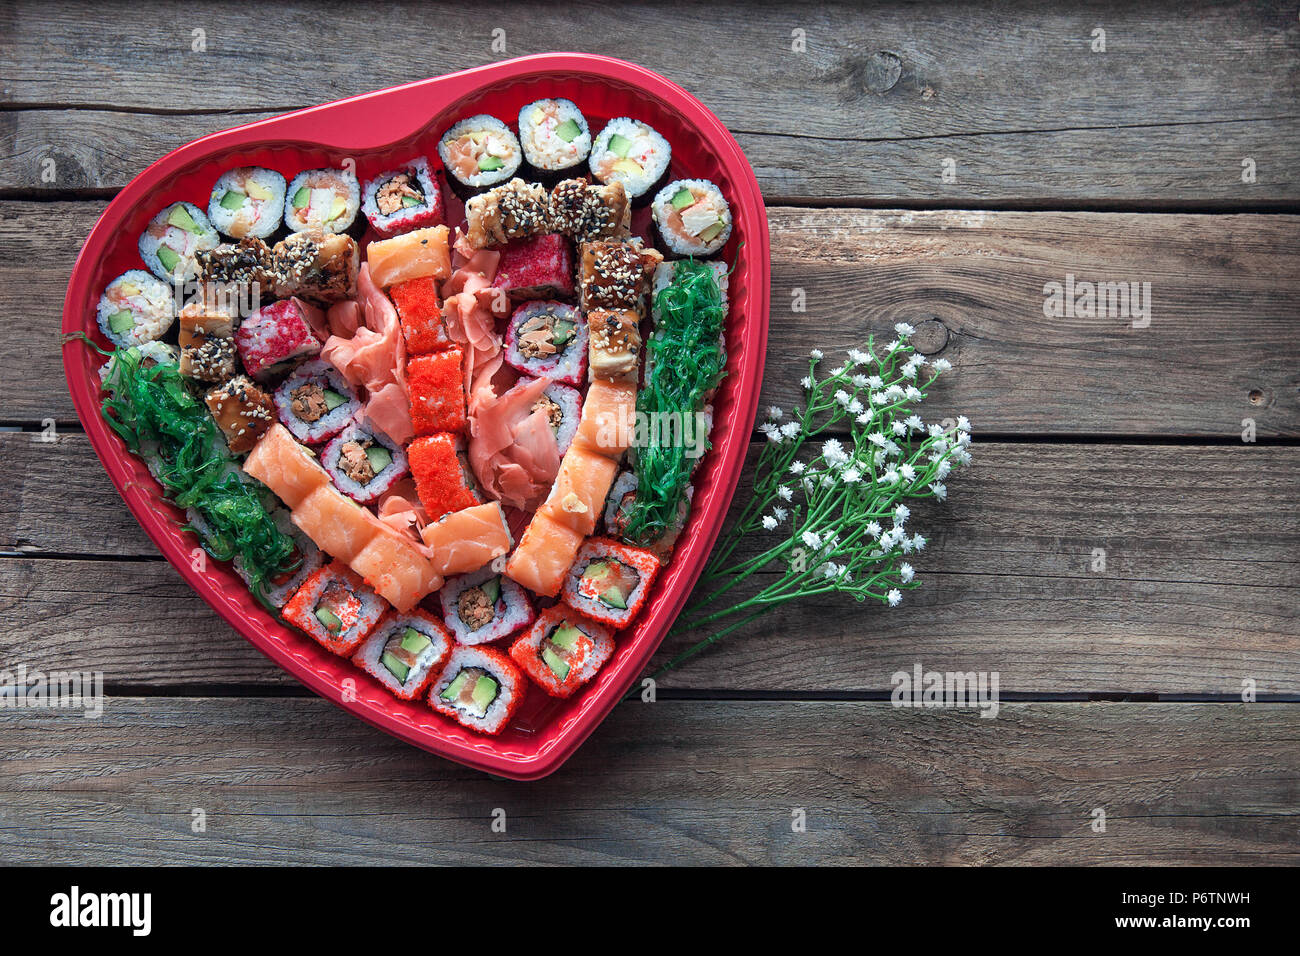 Sushi on a old wooden table background with a heart shaped decor Stock Photo